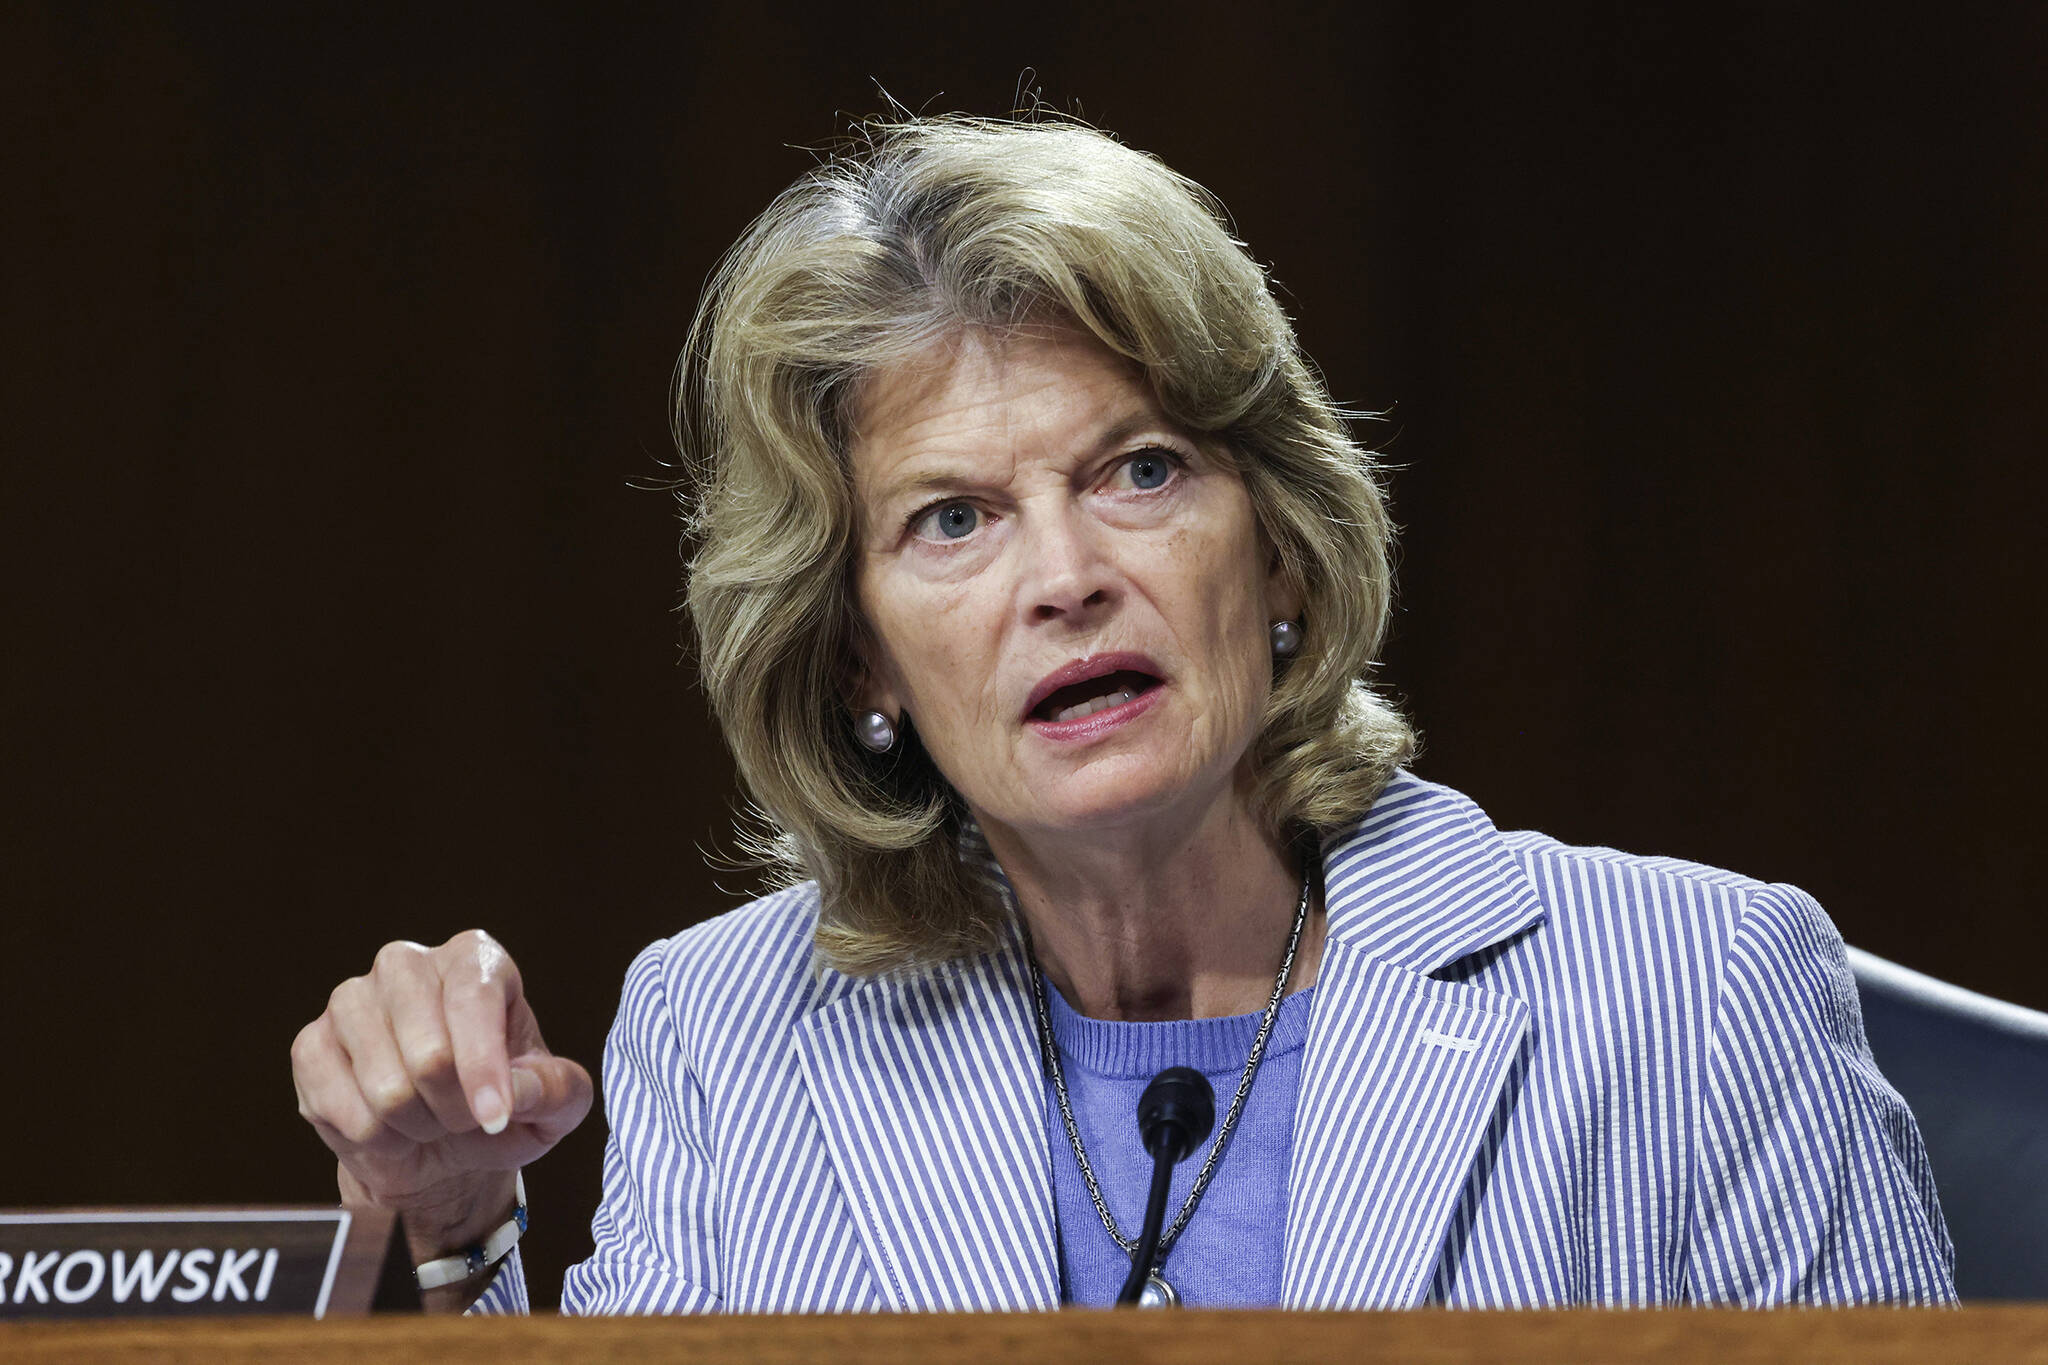 Sen. Lisa Murkowski, R-Alaska, speaks during a hearing on Capitol Hill in Washington, on June 17, 2021. Murkowski continues to have a substantial cash advantage over her opponent backed by former President Donald Trump, who has vowed revenge on the incumbent Alaska Republican. Murkowski brought in more than $1.5 million in the three-month period ending March 31, 2022, according to Federal Election Commission filings. The quarterly reports were due Friday, April 15. Murkowski ended the quarter with $5.2 million cash on hand with no debt. (Evelyn Hockstein / Pool Photo)